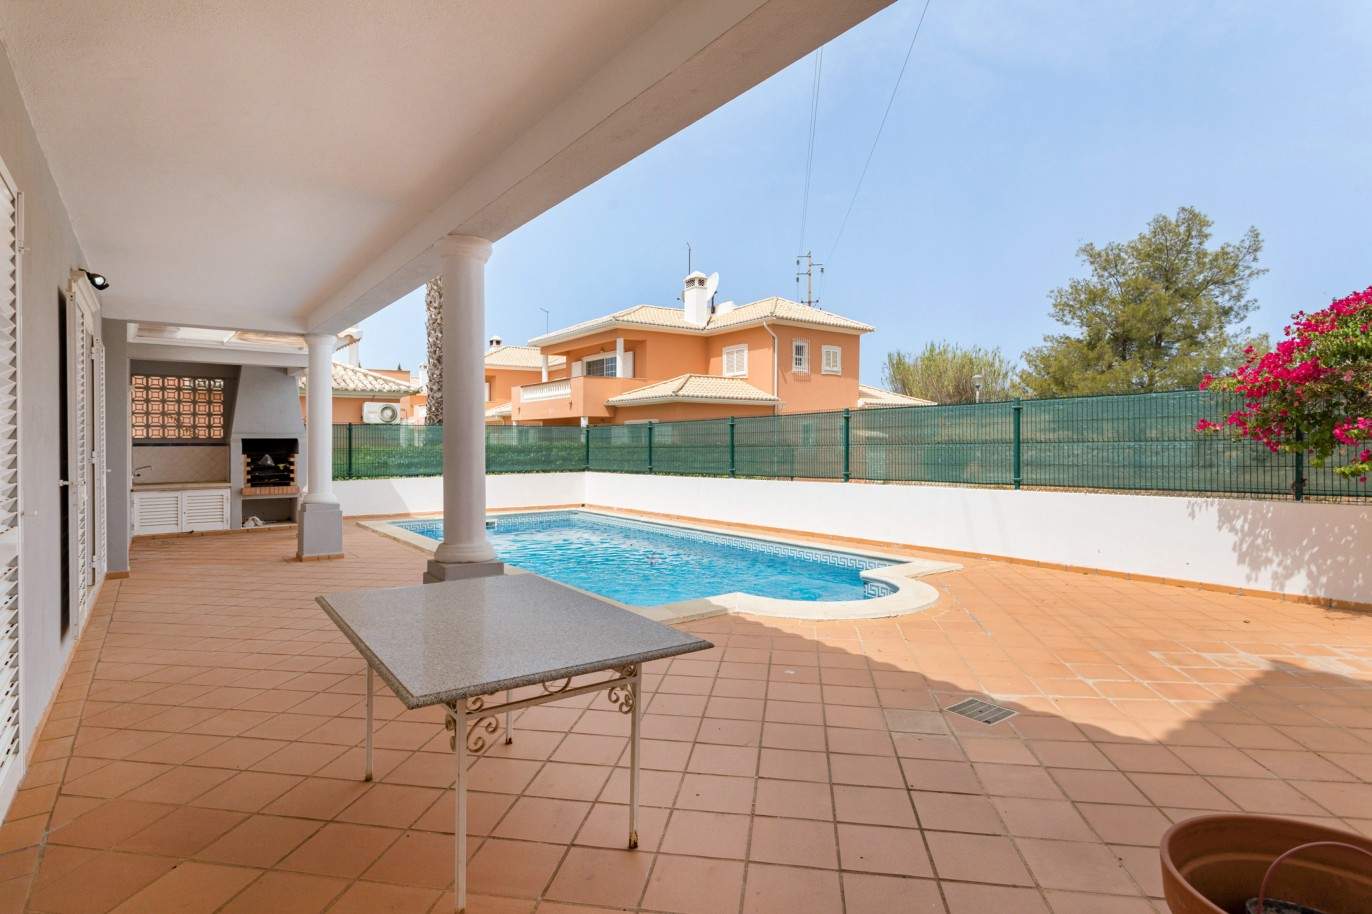 4 Bedroom Villa with swimming pool, for sale in Quarteira, Algarve_201730